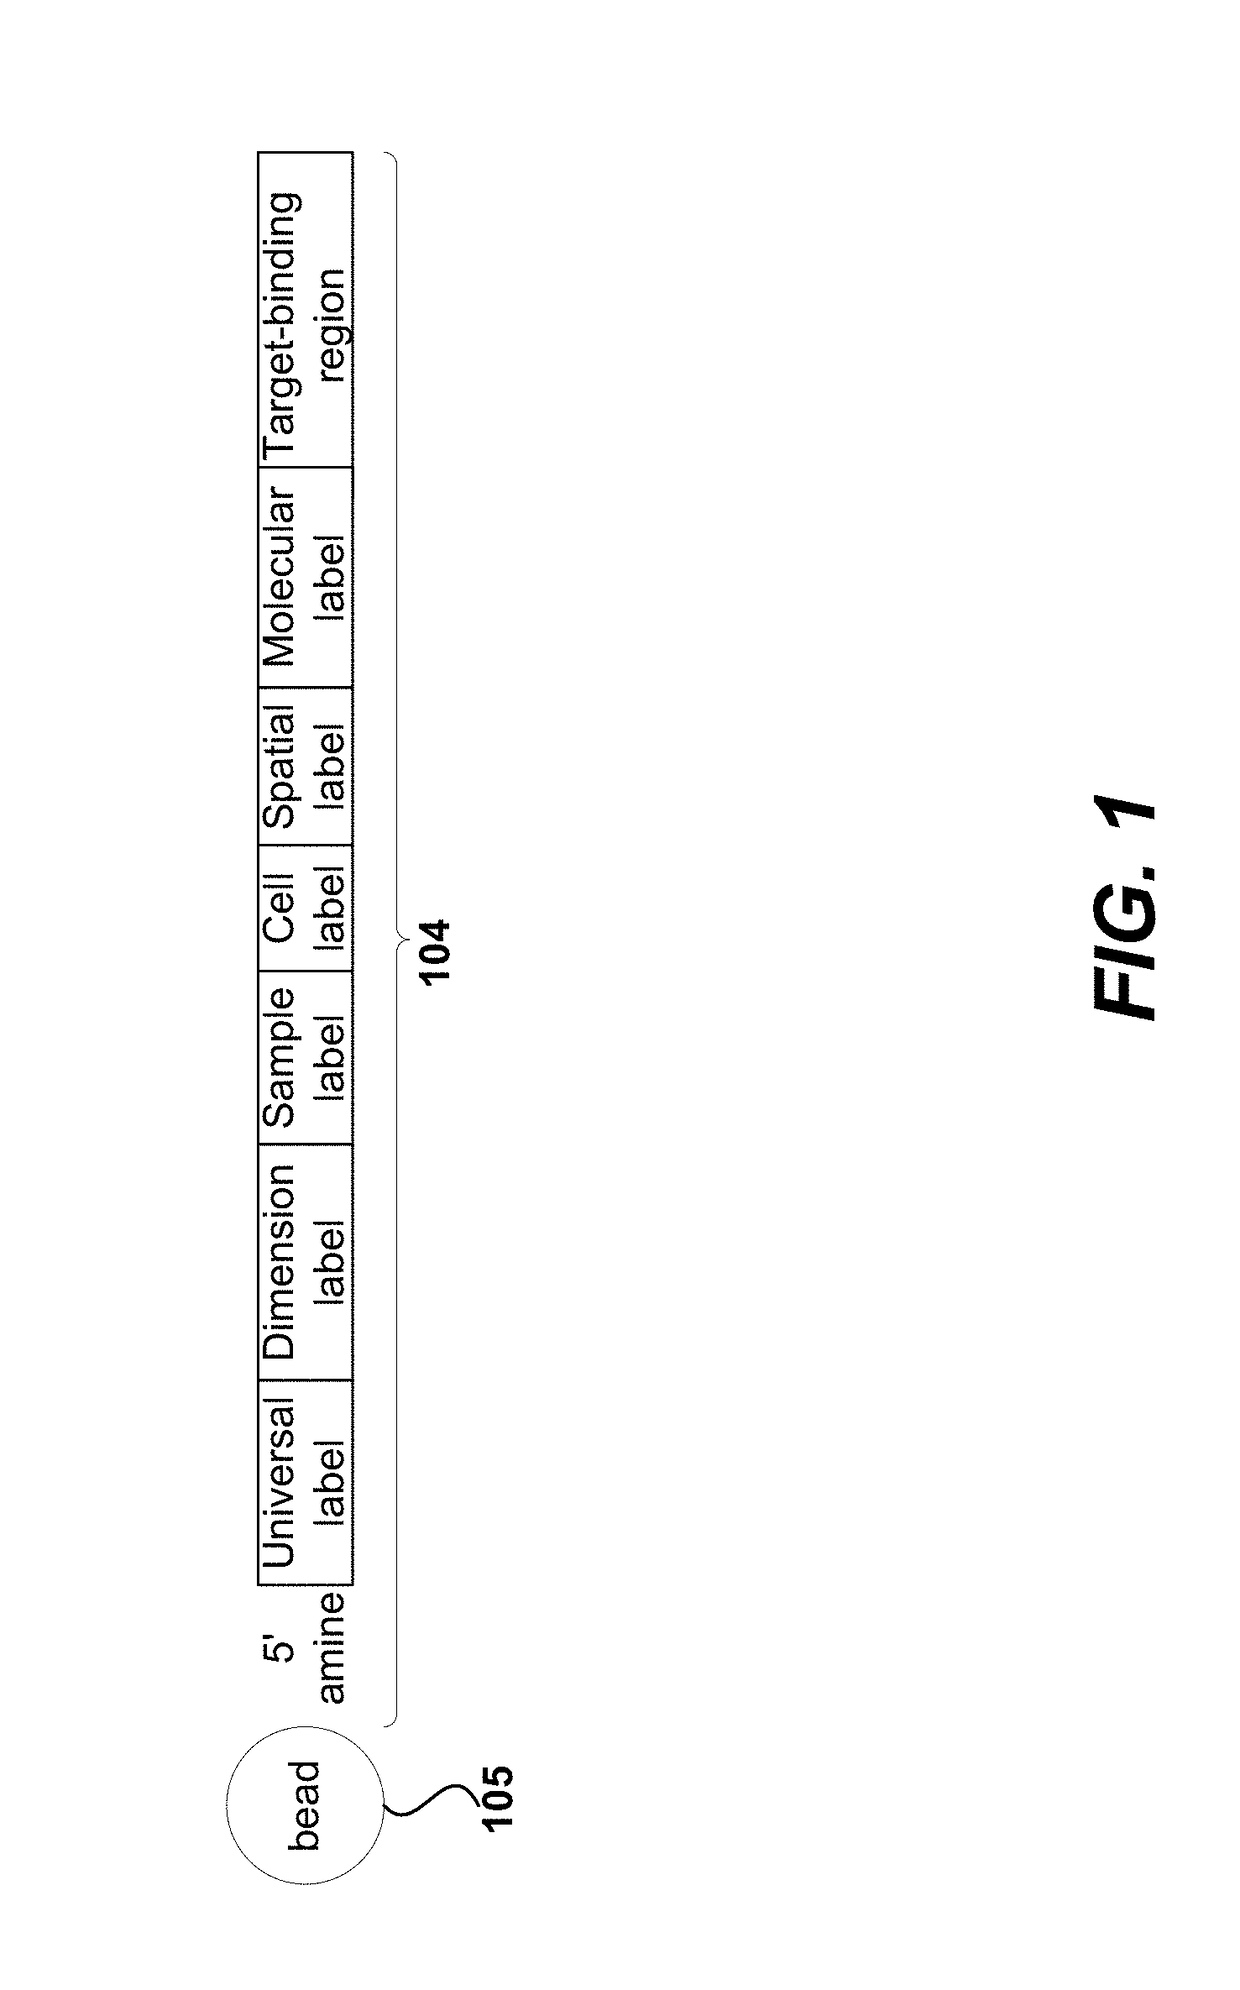 Methods for cell label classification